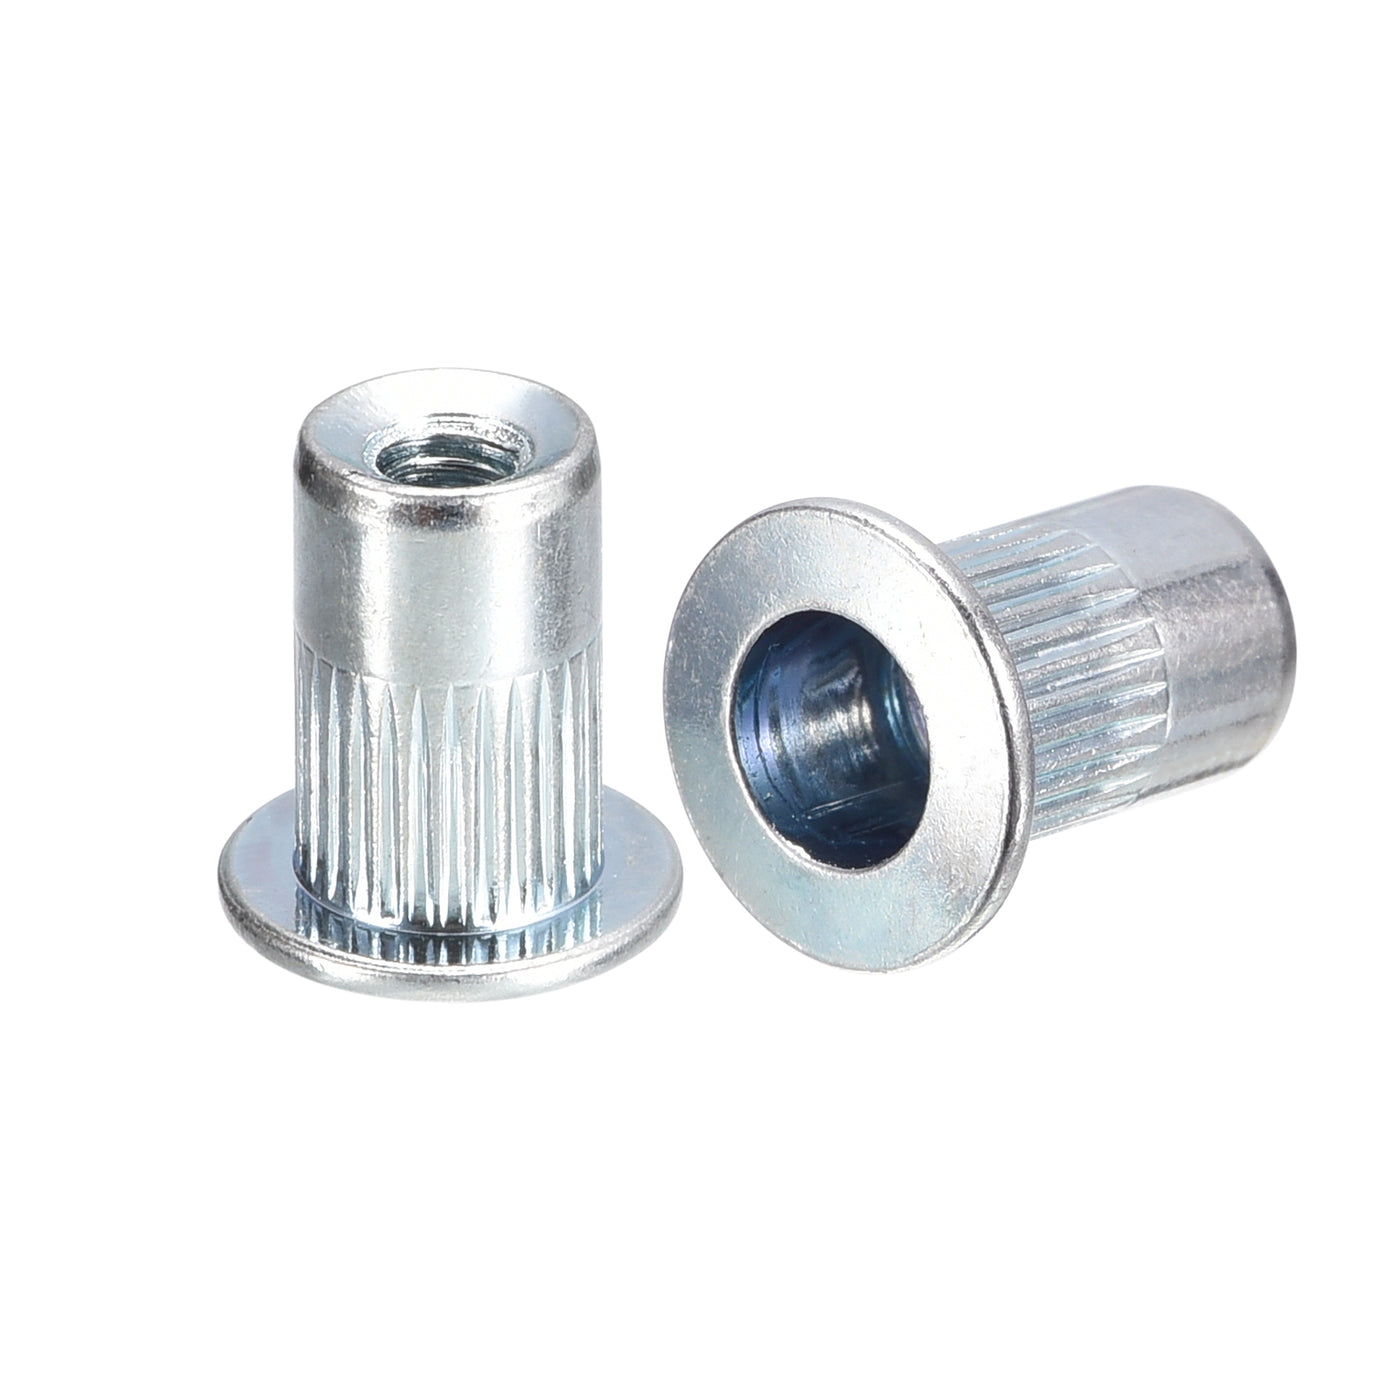 uxcell Uxcell Rivet Nuts, Carbon Steel Knurled Flat Head Threaded Insert Nuts for Metal, Plastic